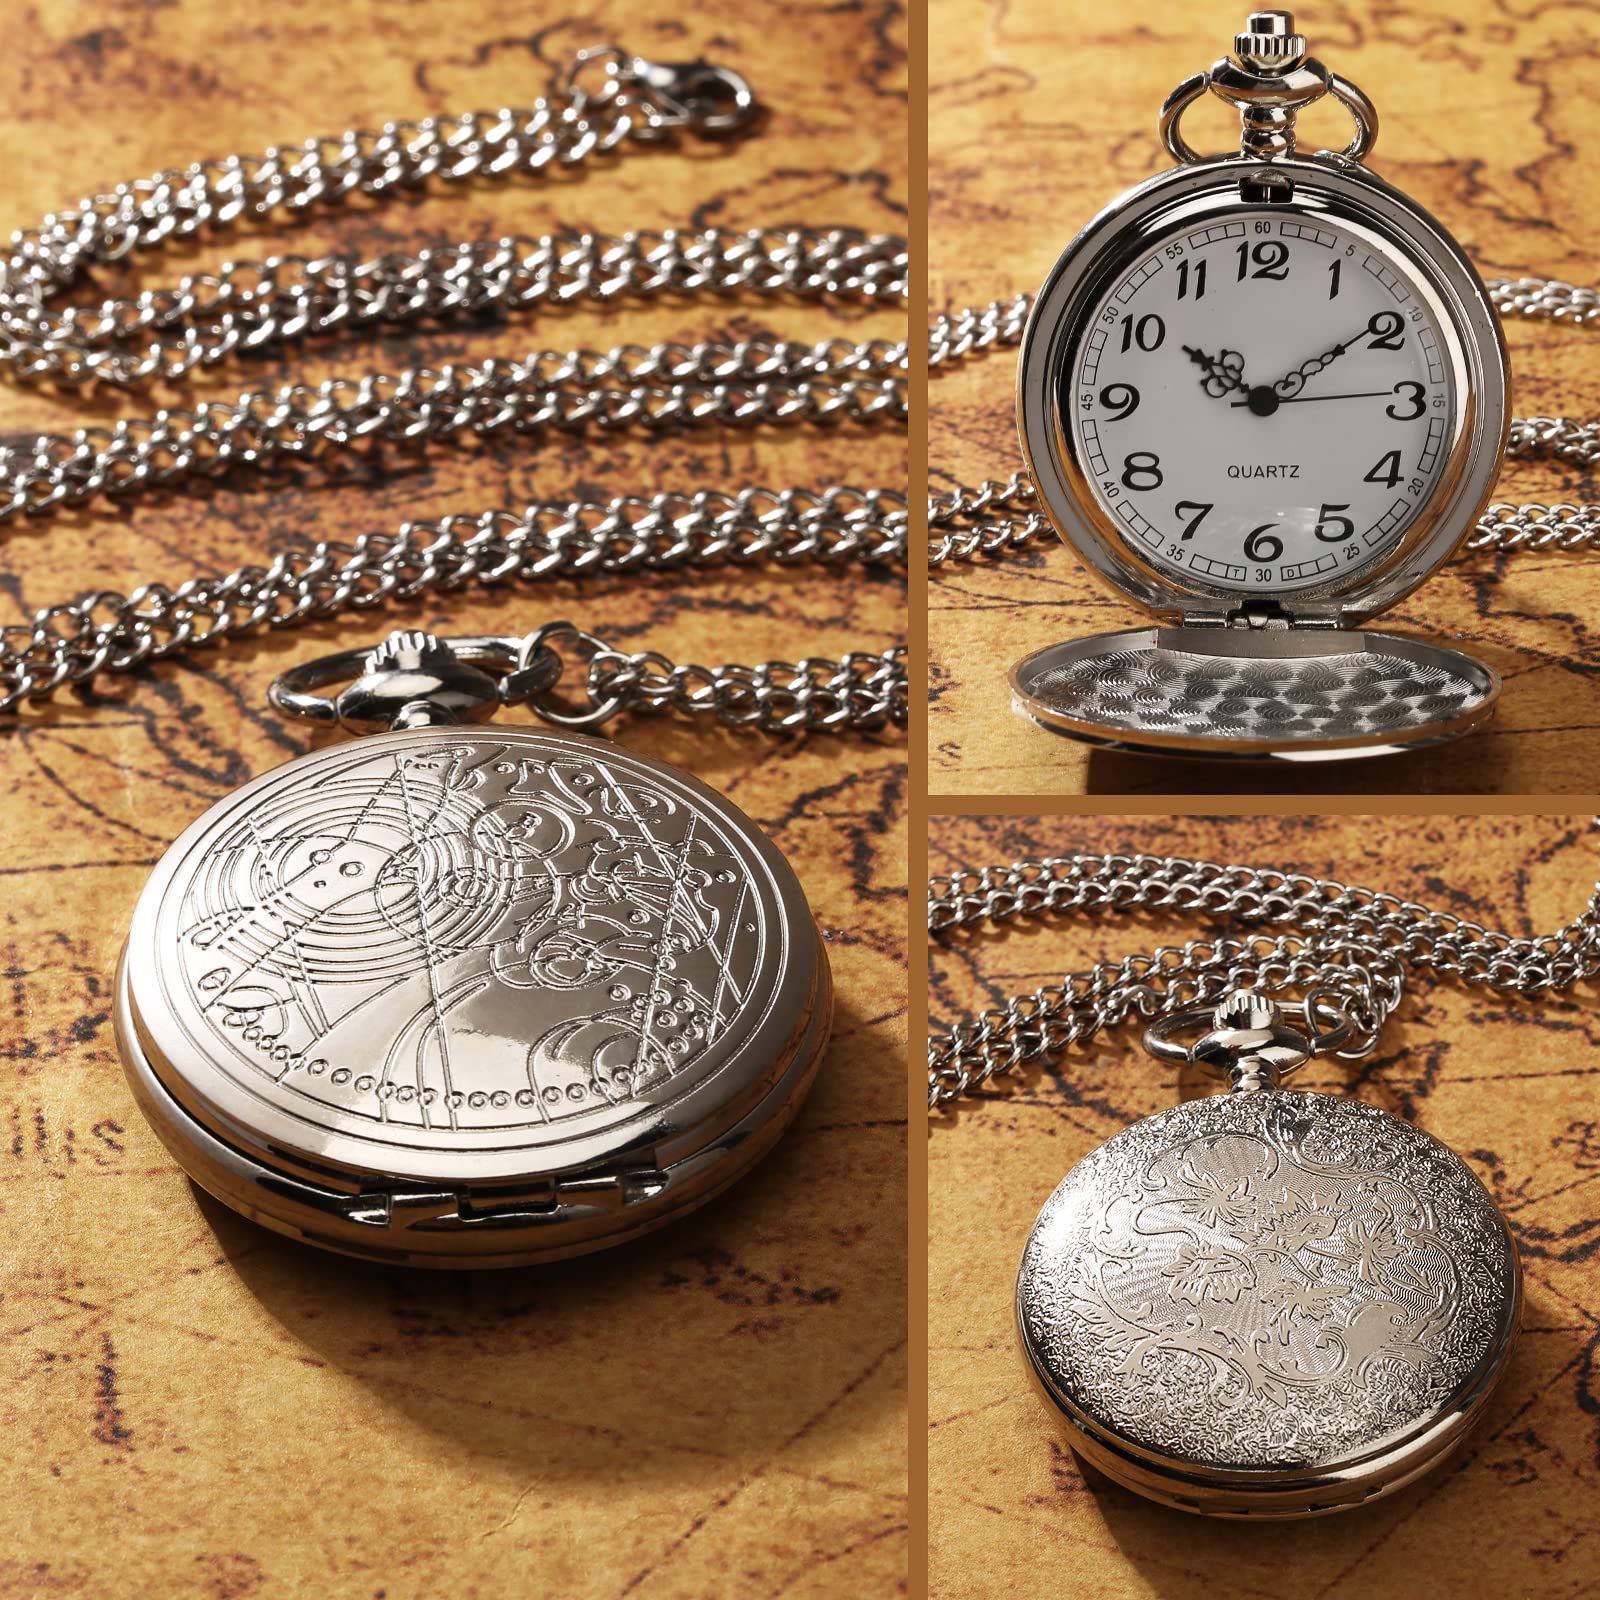 YISUYA Vintage Pocket Watches for Men Boy, FOB Pocket Watch with Chain, Christmas Gifts, Father's Day Gifts, Valentine's Day Gifts, Birthday Gifts, Necklace Gifts for Women, Gift Box and Card